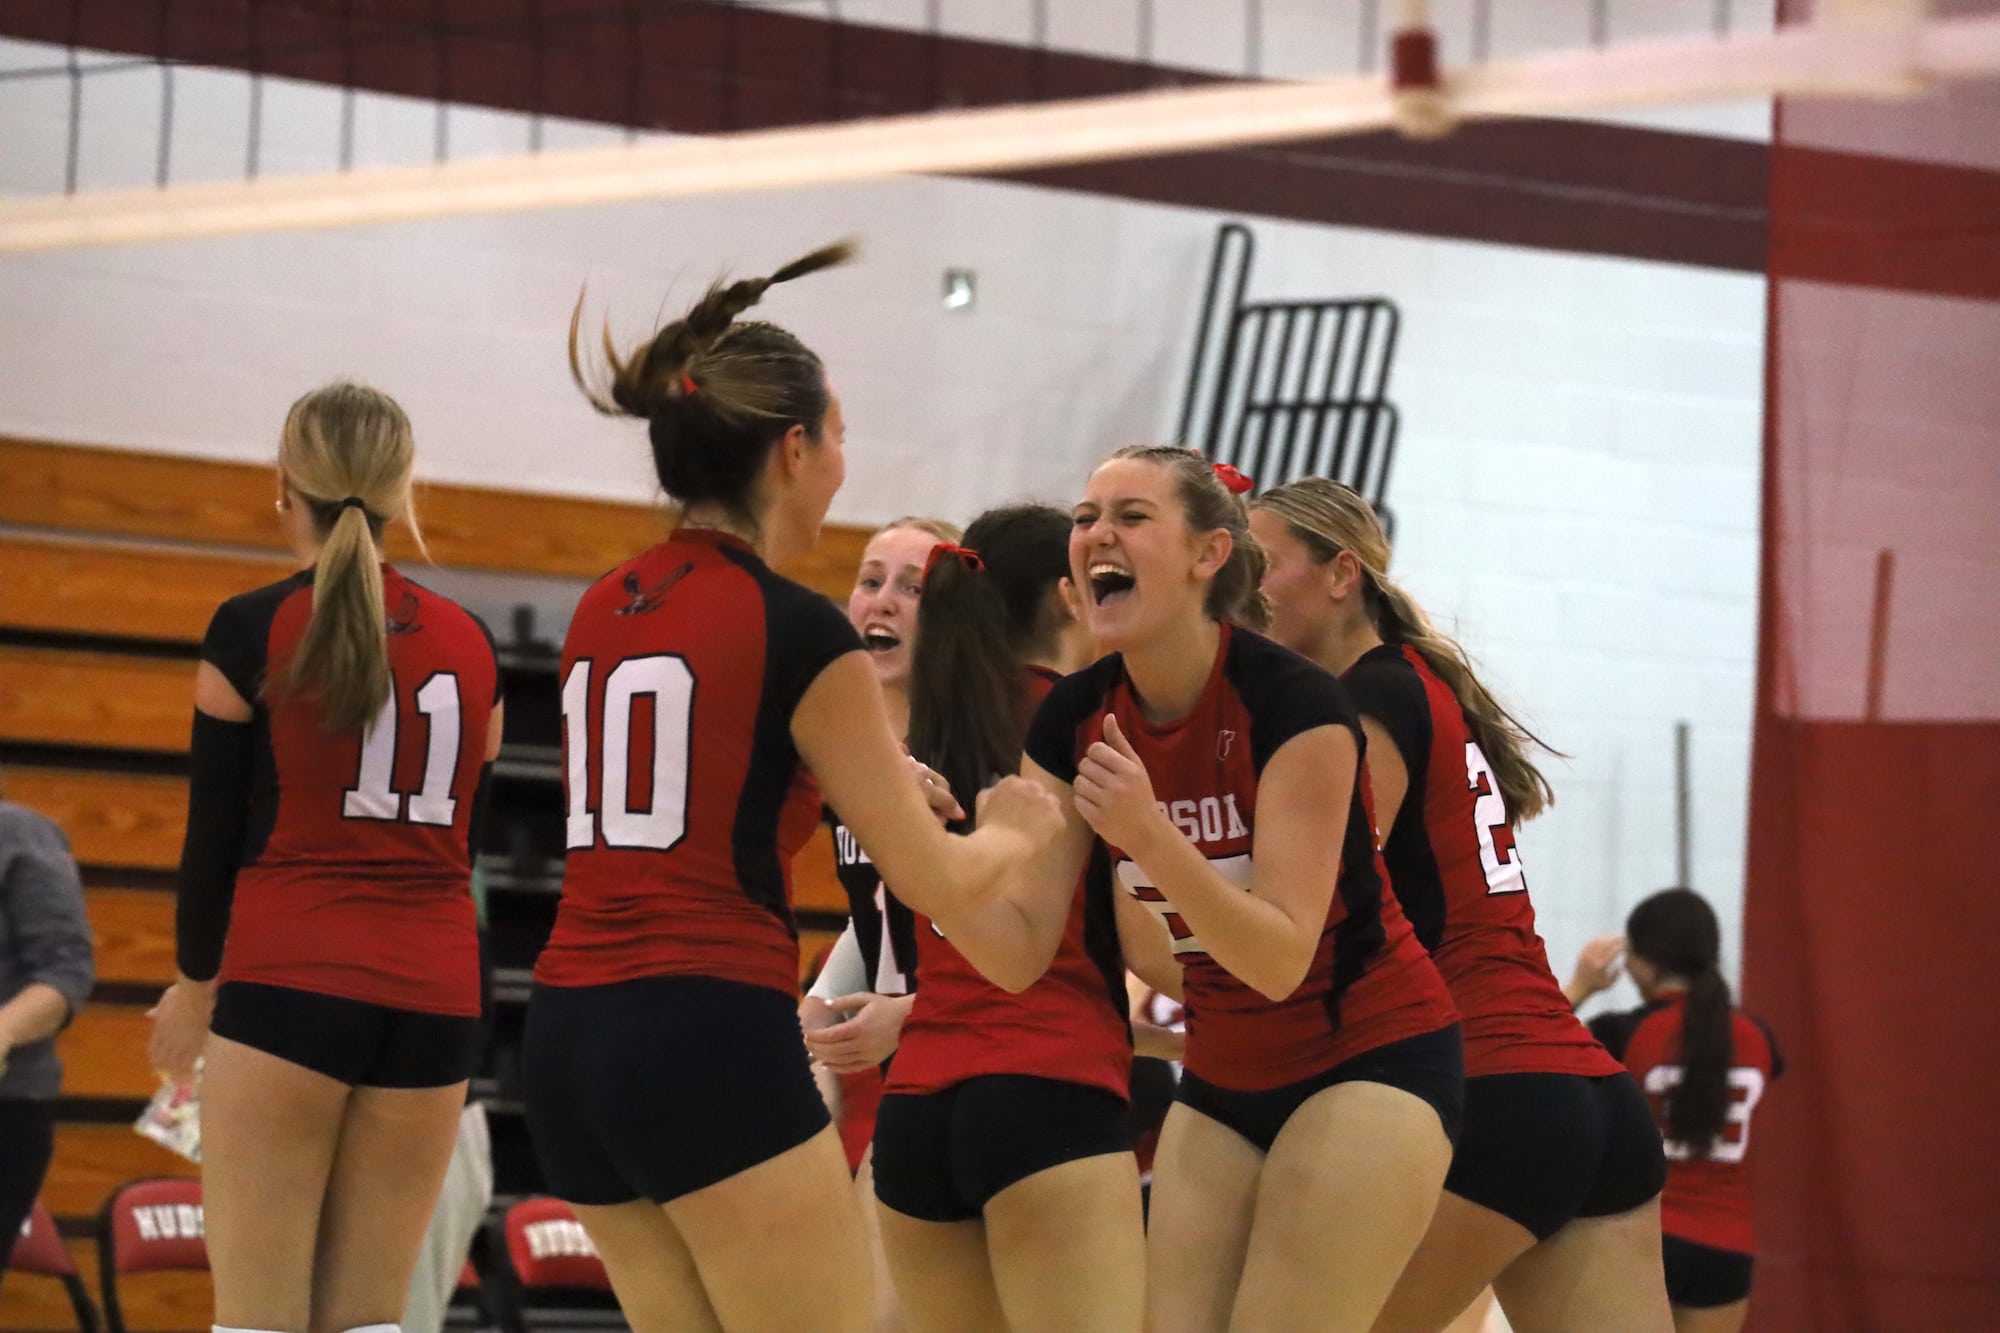 Westborough tops Hudson in battle of volleyball powerhouses